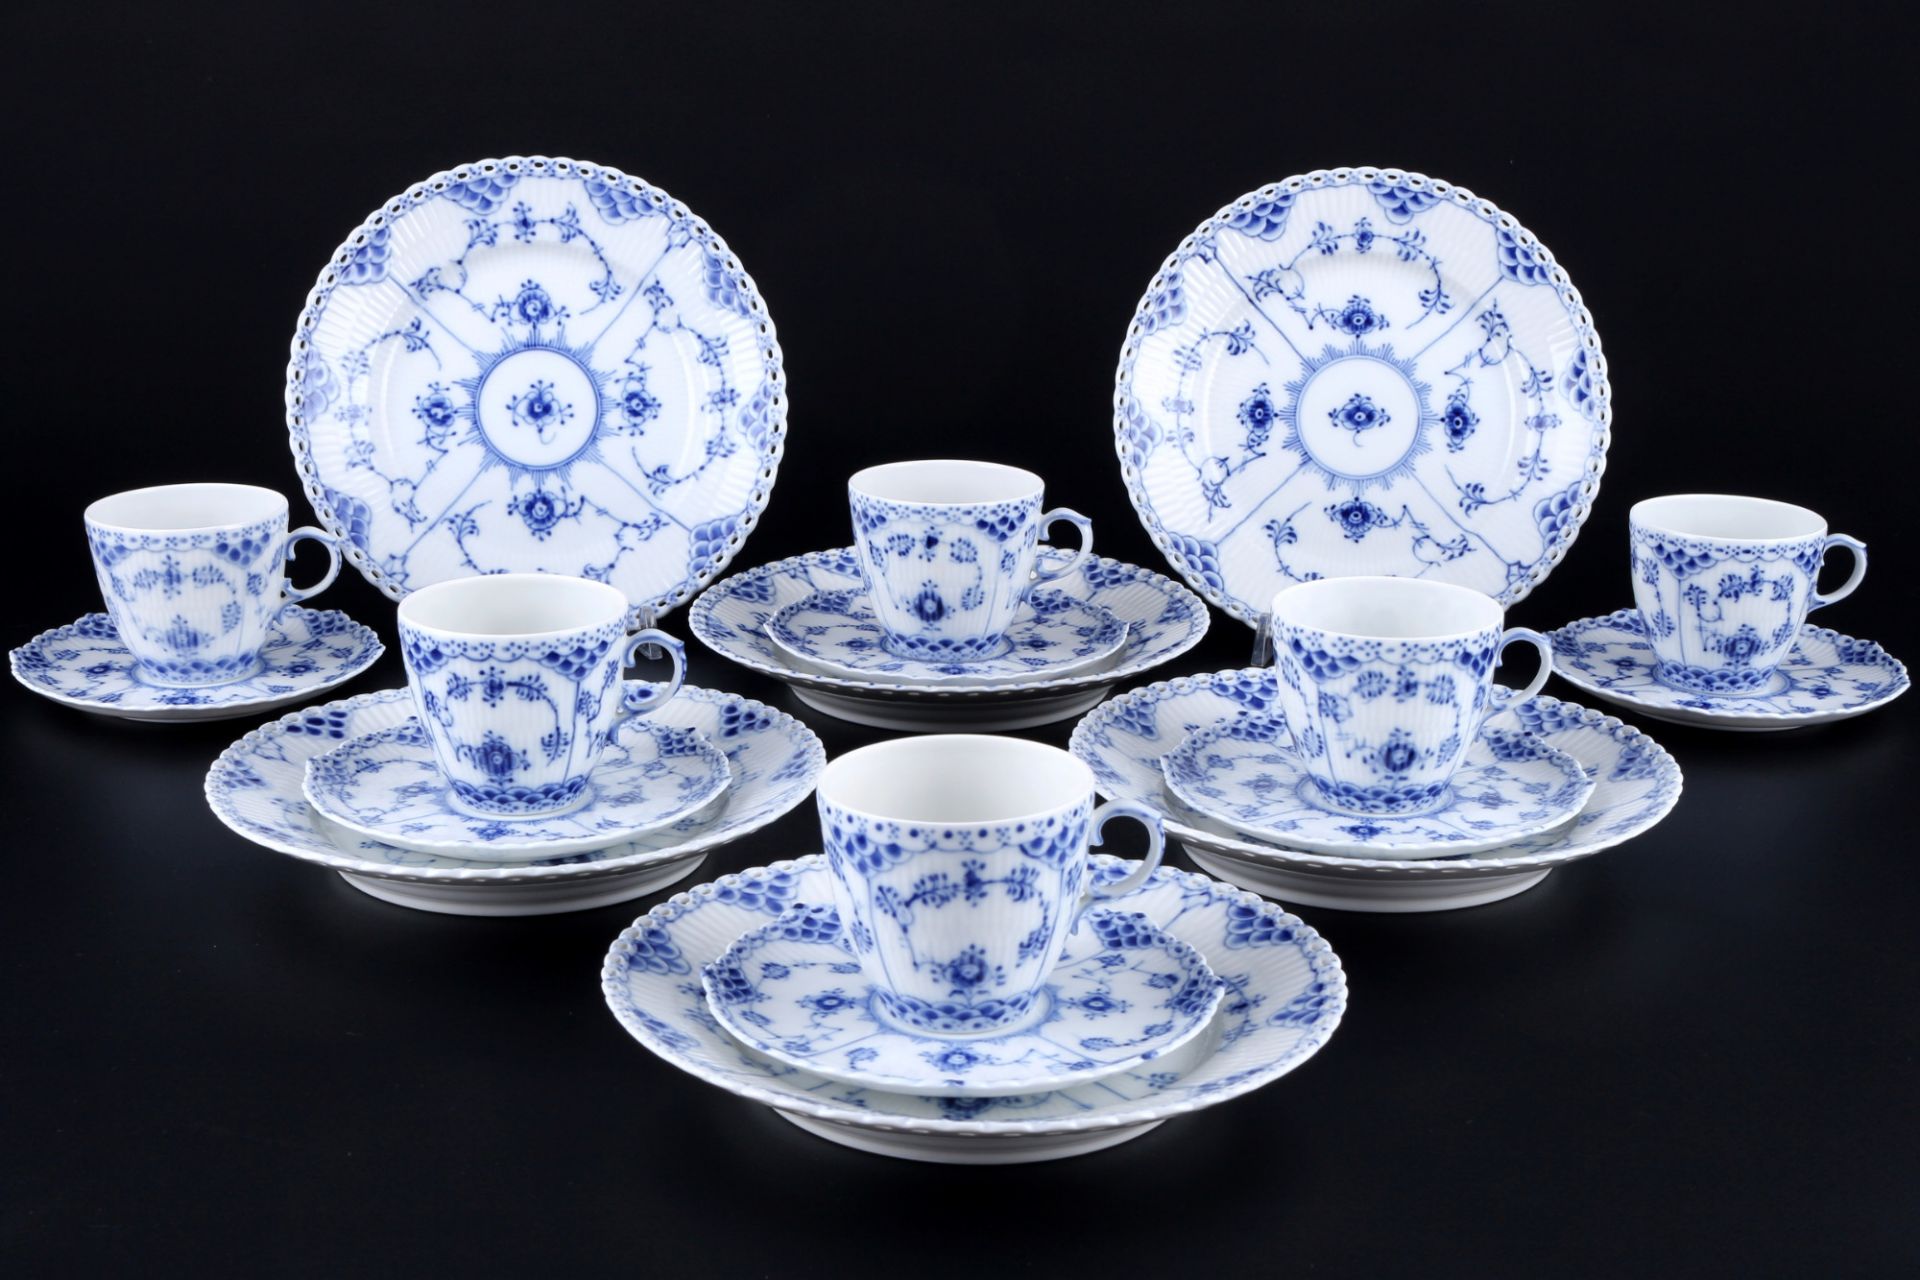 Royal Copenhagen Musselmalet Full Lace 6 coffee cups with dessert plates 1035/1086 1st choice, Voll